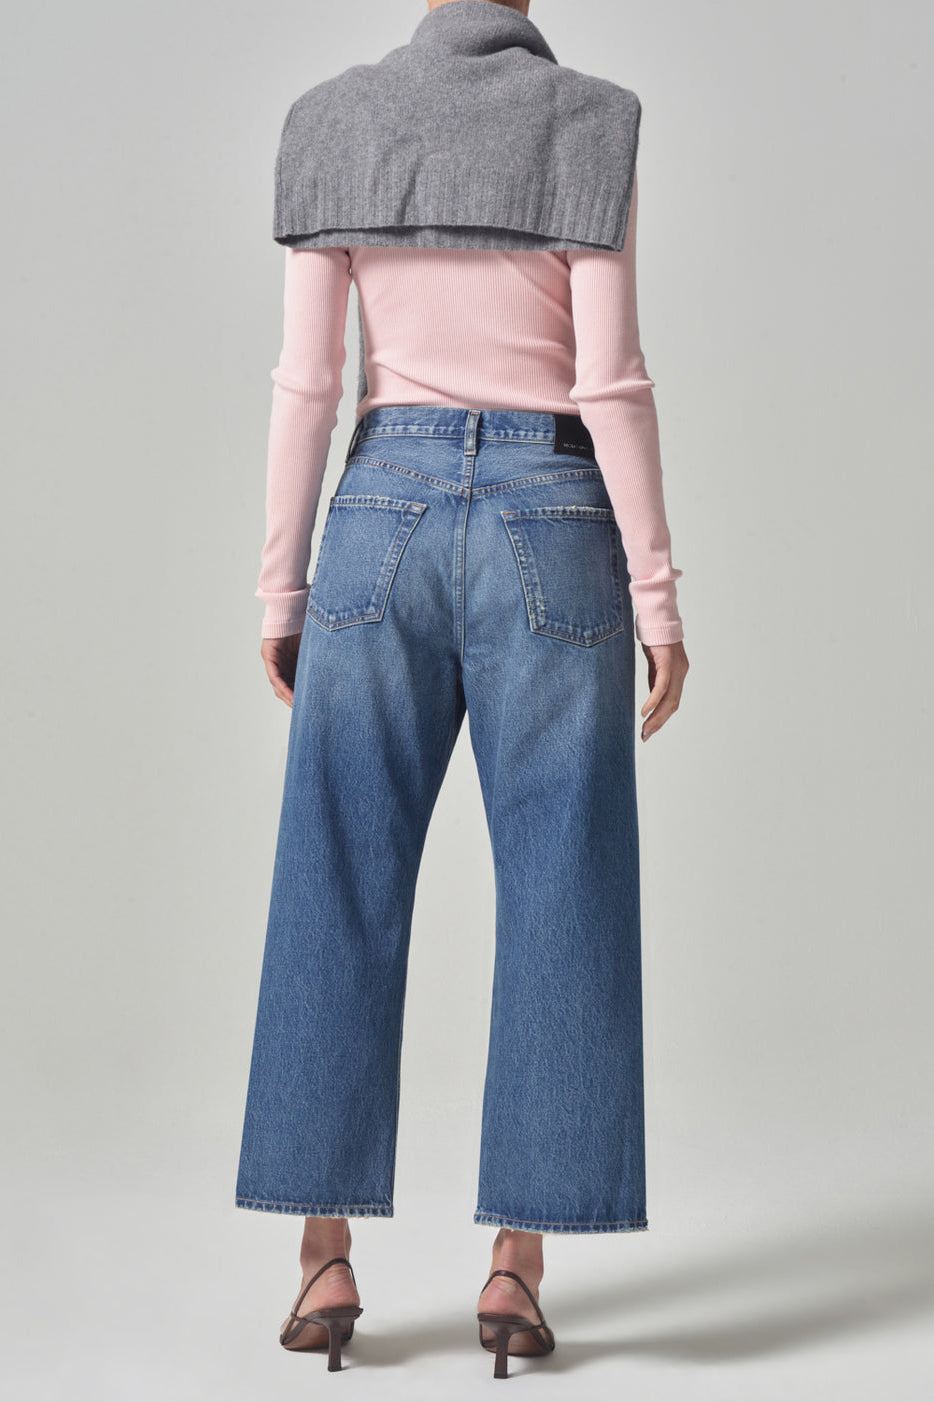 Jeans Gaucho in OasisCitizens of Humanity - Anita Hass